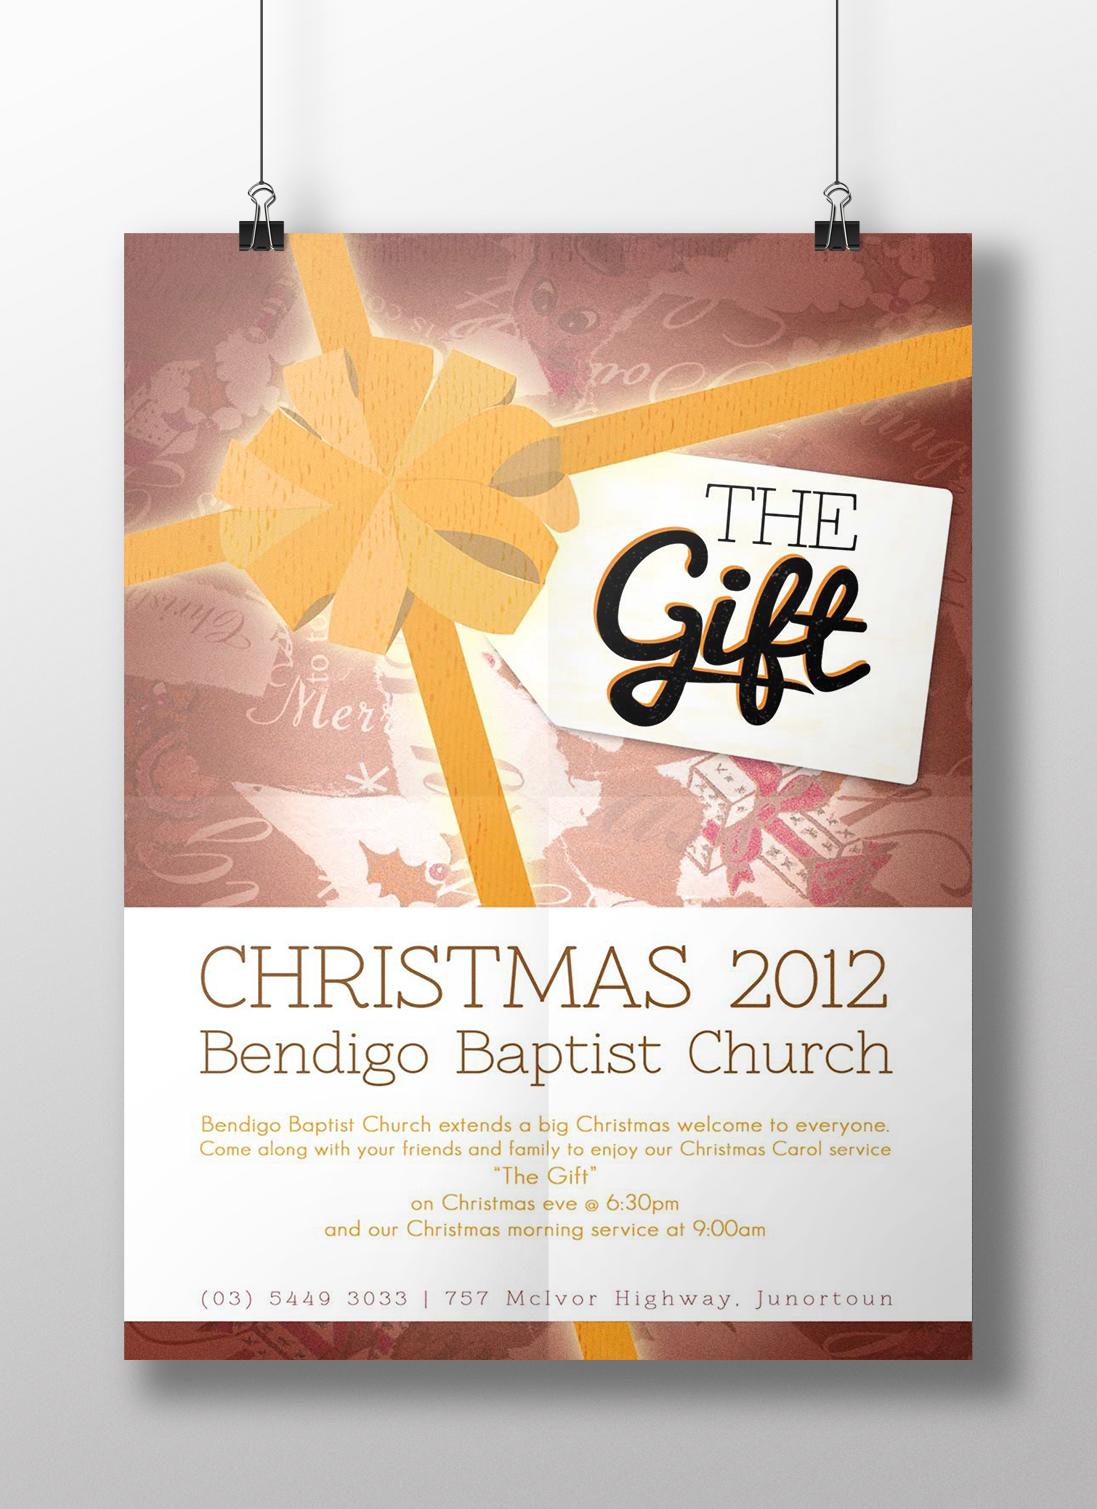  2012 Christmas imagery. Poster, flyer, bulletin, banner and slideshow were all made using this graphic.&nbsp; 